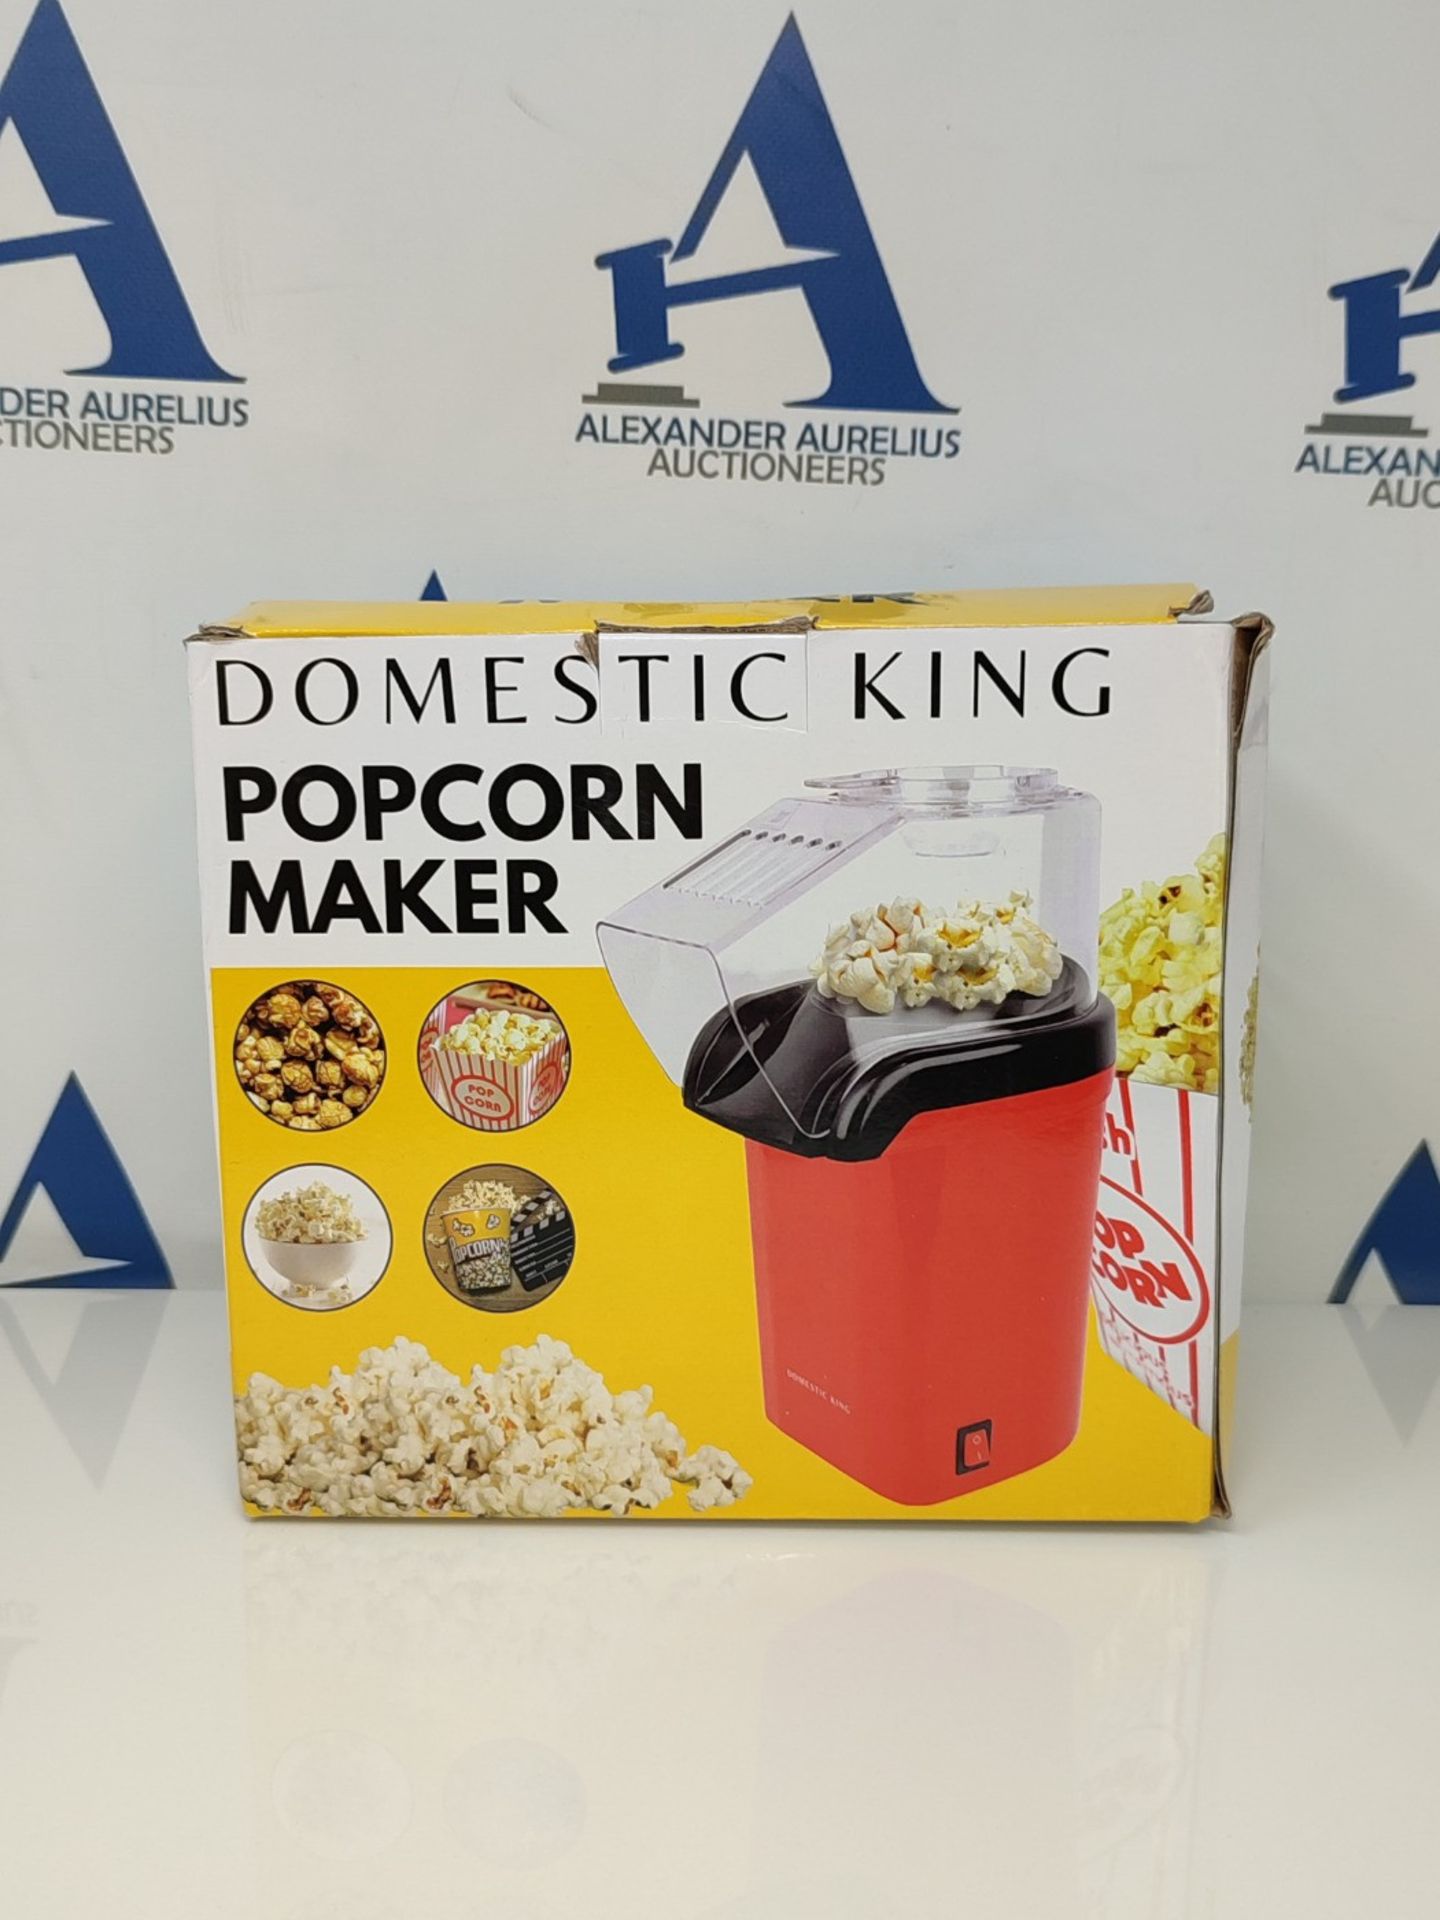 Domestic King Popcorn Maker Home Made Popcorn Machine 1200W with Measuring Cup Healthy